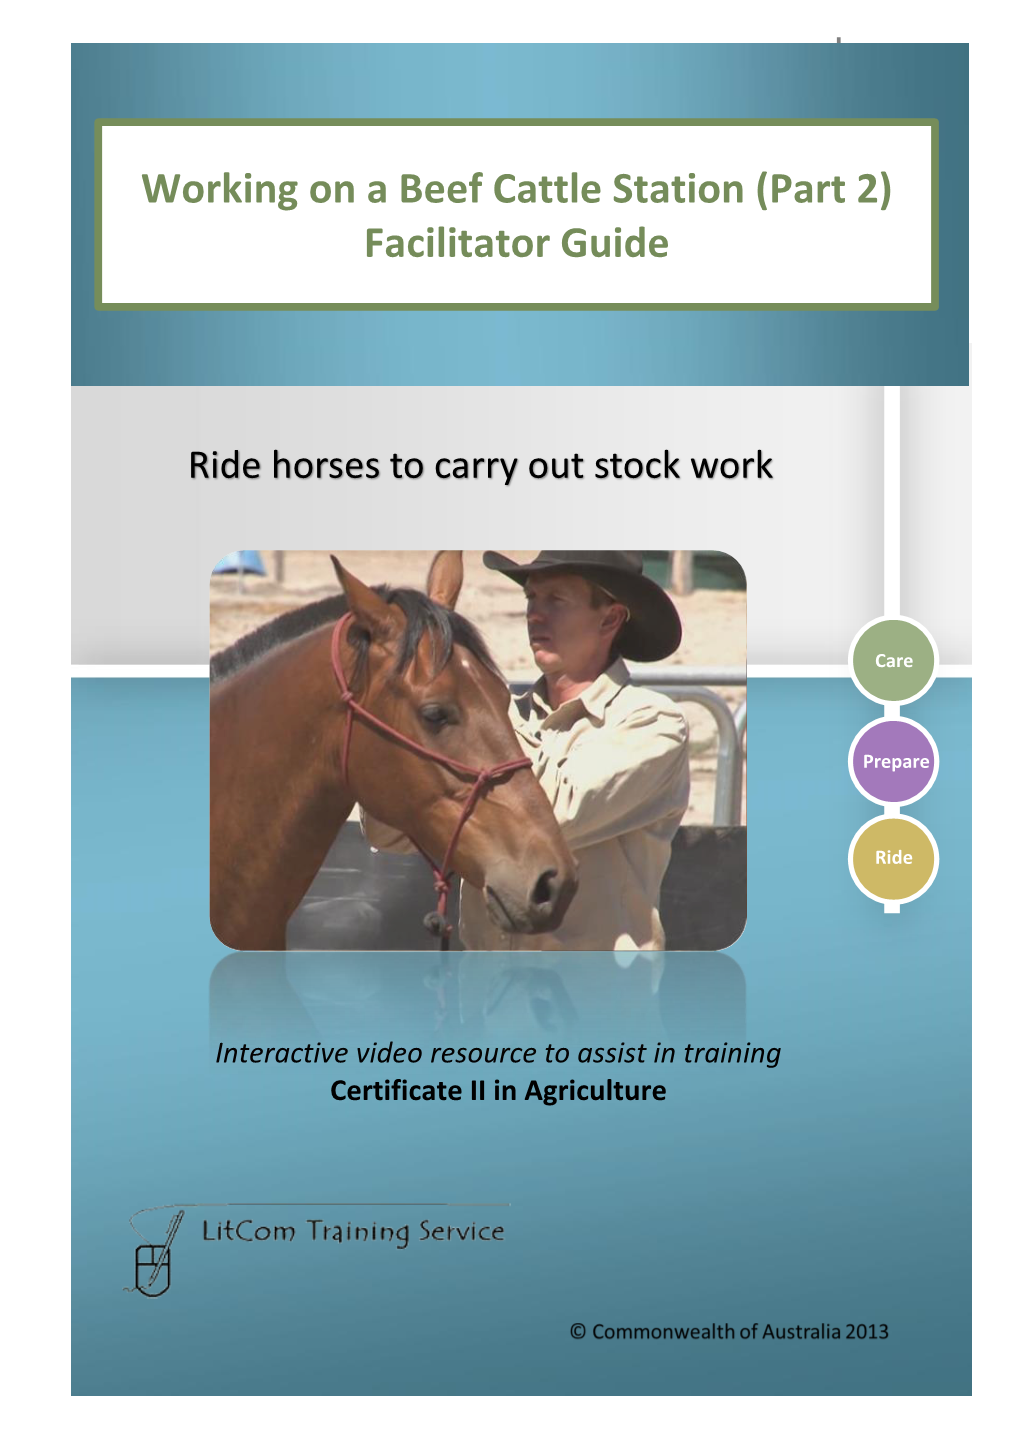 Working on a Beef Cattle Station (Part 2) - Facilitator Guide WELL 2013